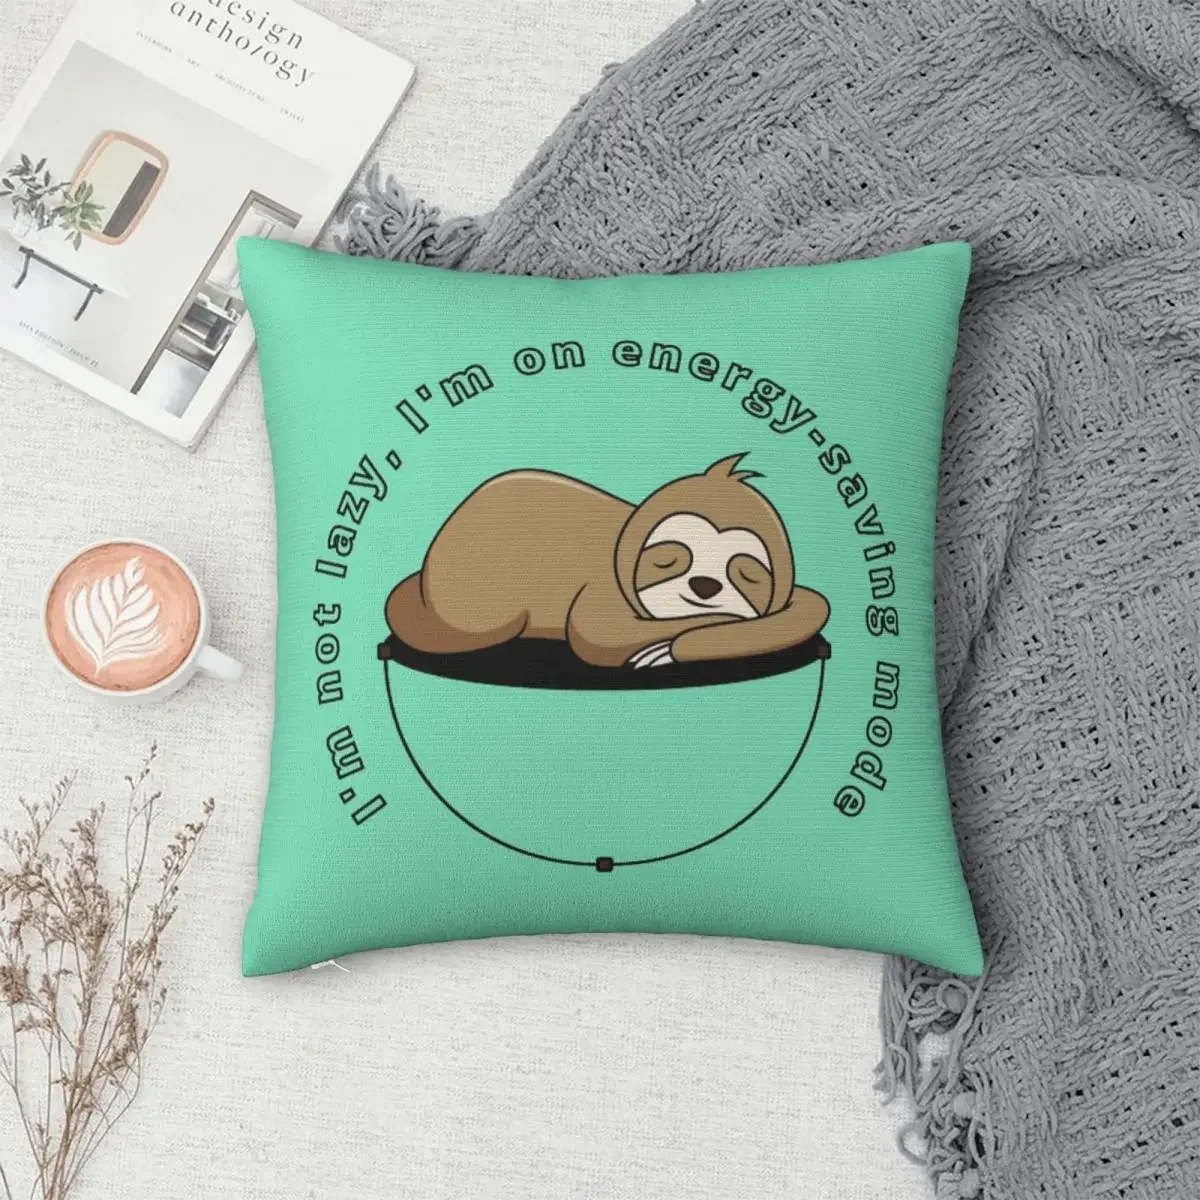 

I'm Not Lazy, I'm On Energy-saving Mode Pillowcase Polyester Pillows Cover Cushion Comfort Throw Pillow Sofa Decorative Cushions